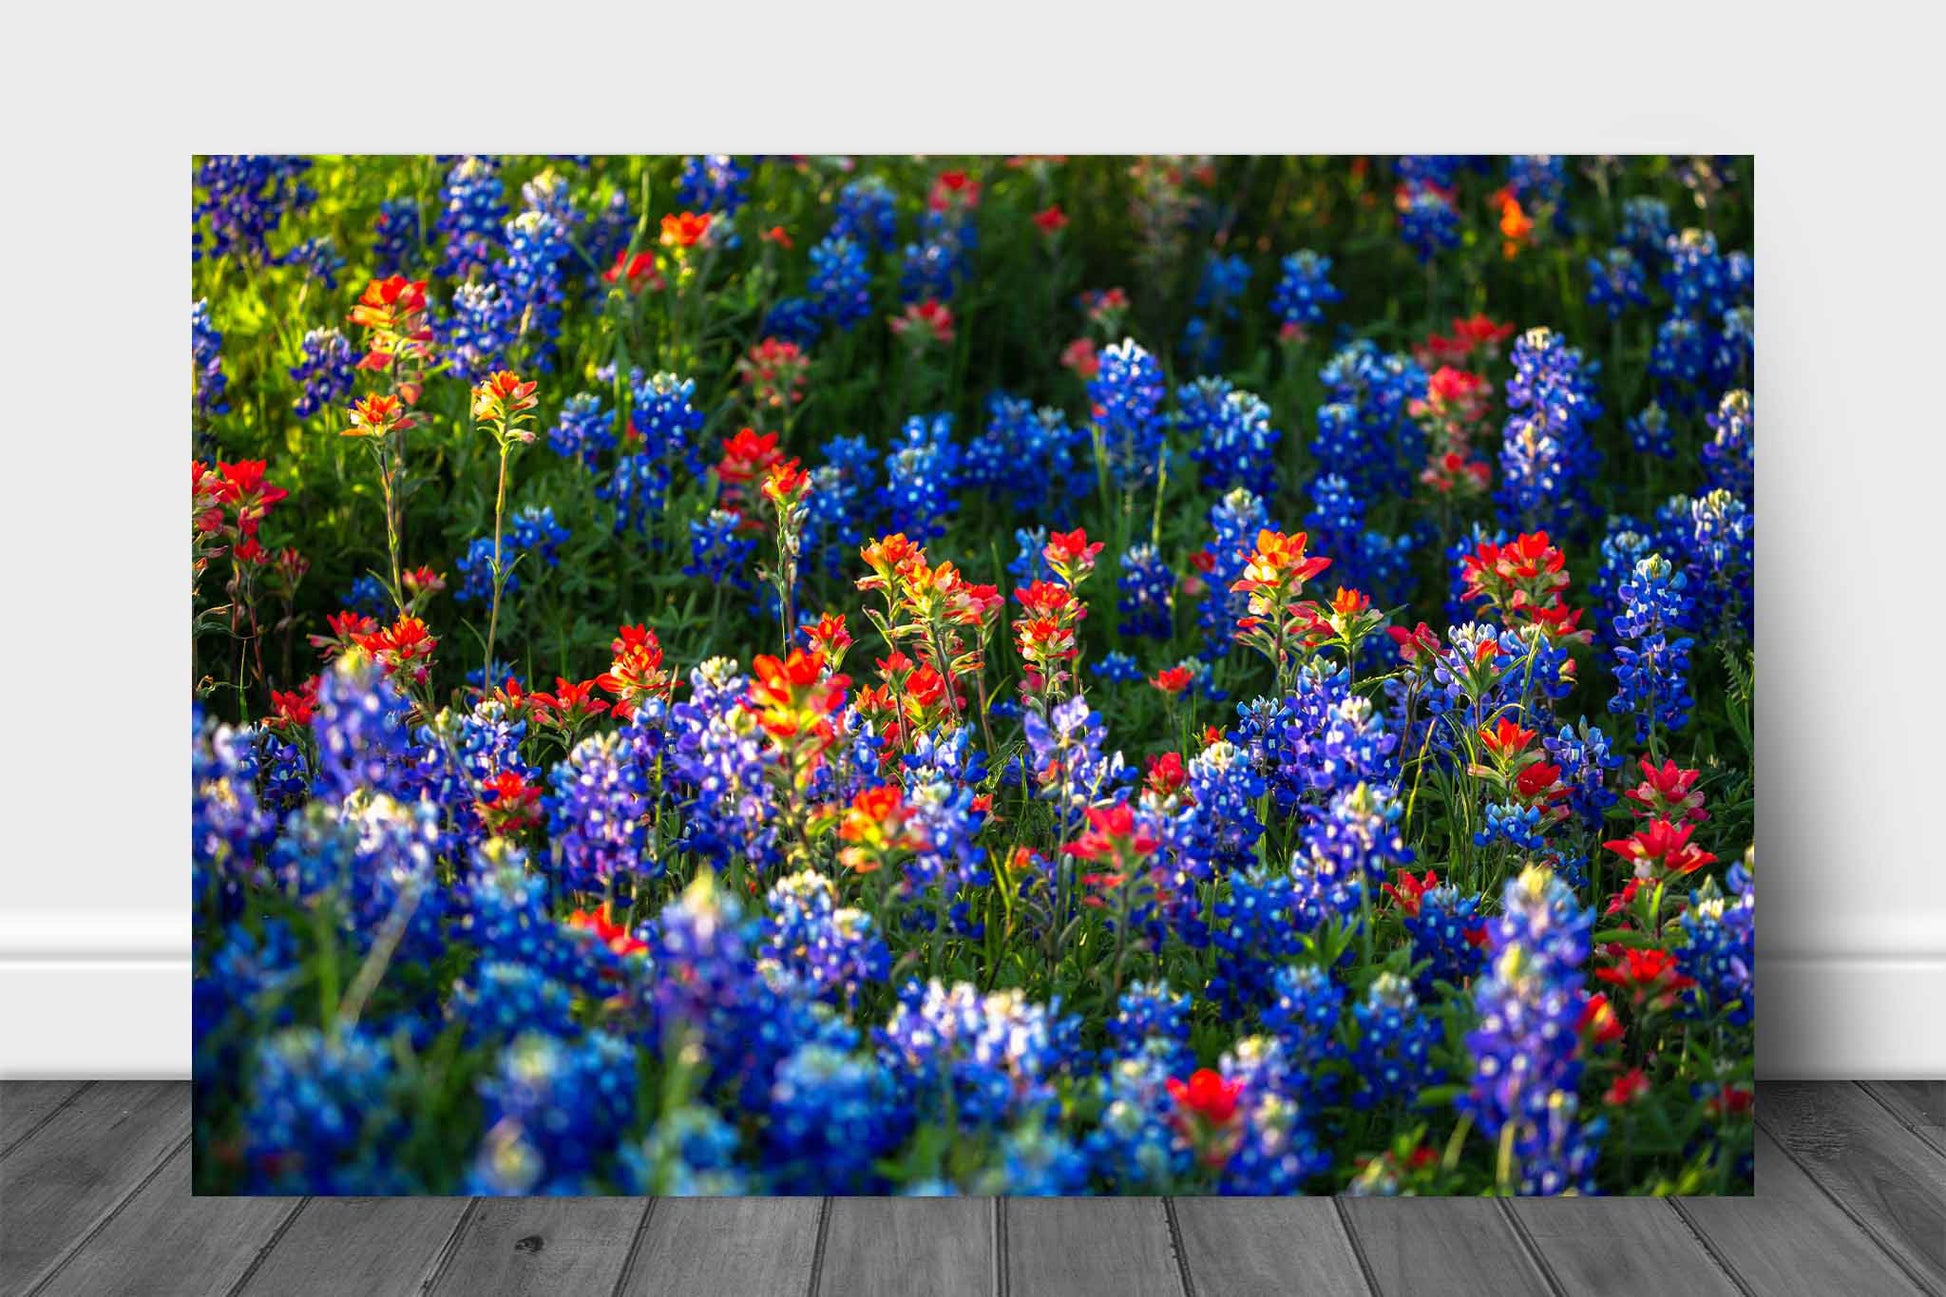 Floral metal print on aluminum of bluebonnets and Indian Paintbrush wildflowers on a spring day in Texas by Sean Ramsey of Southern Plains Photography.